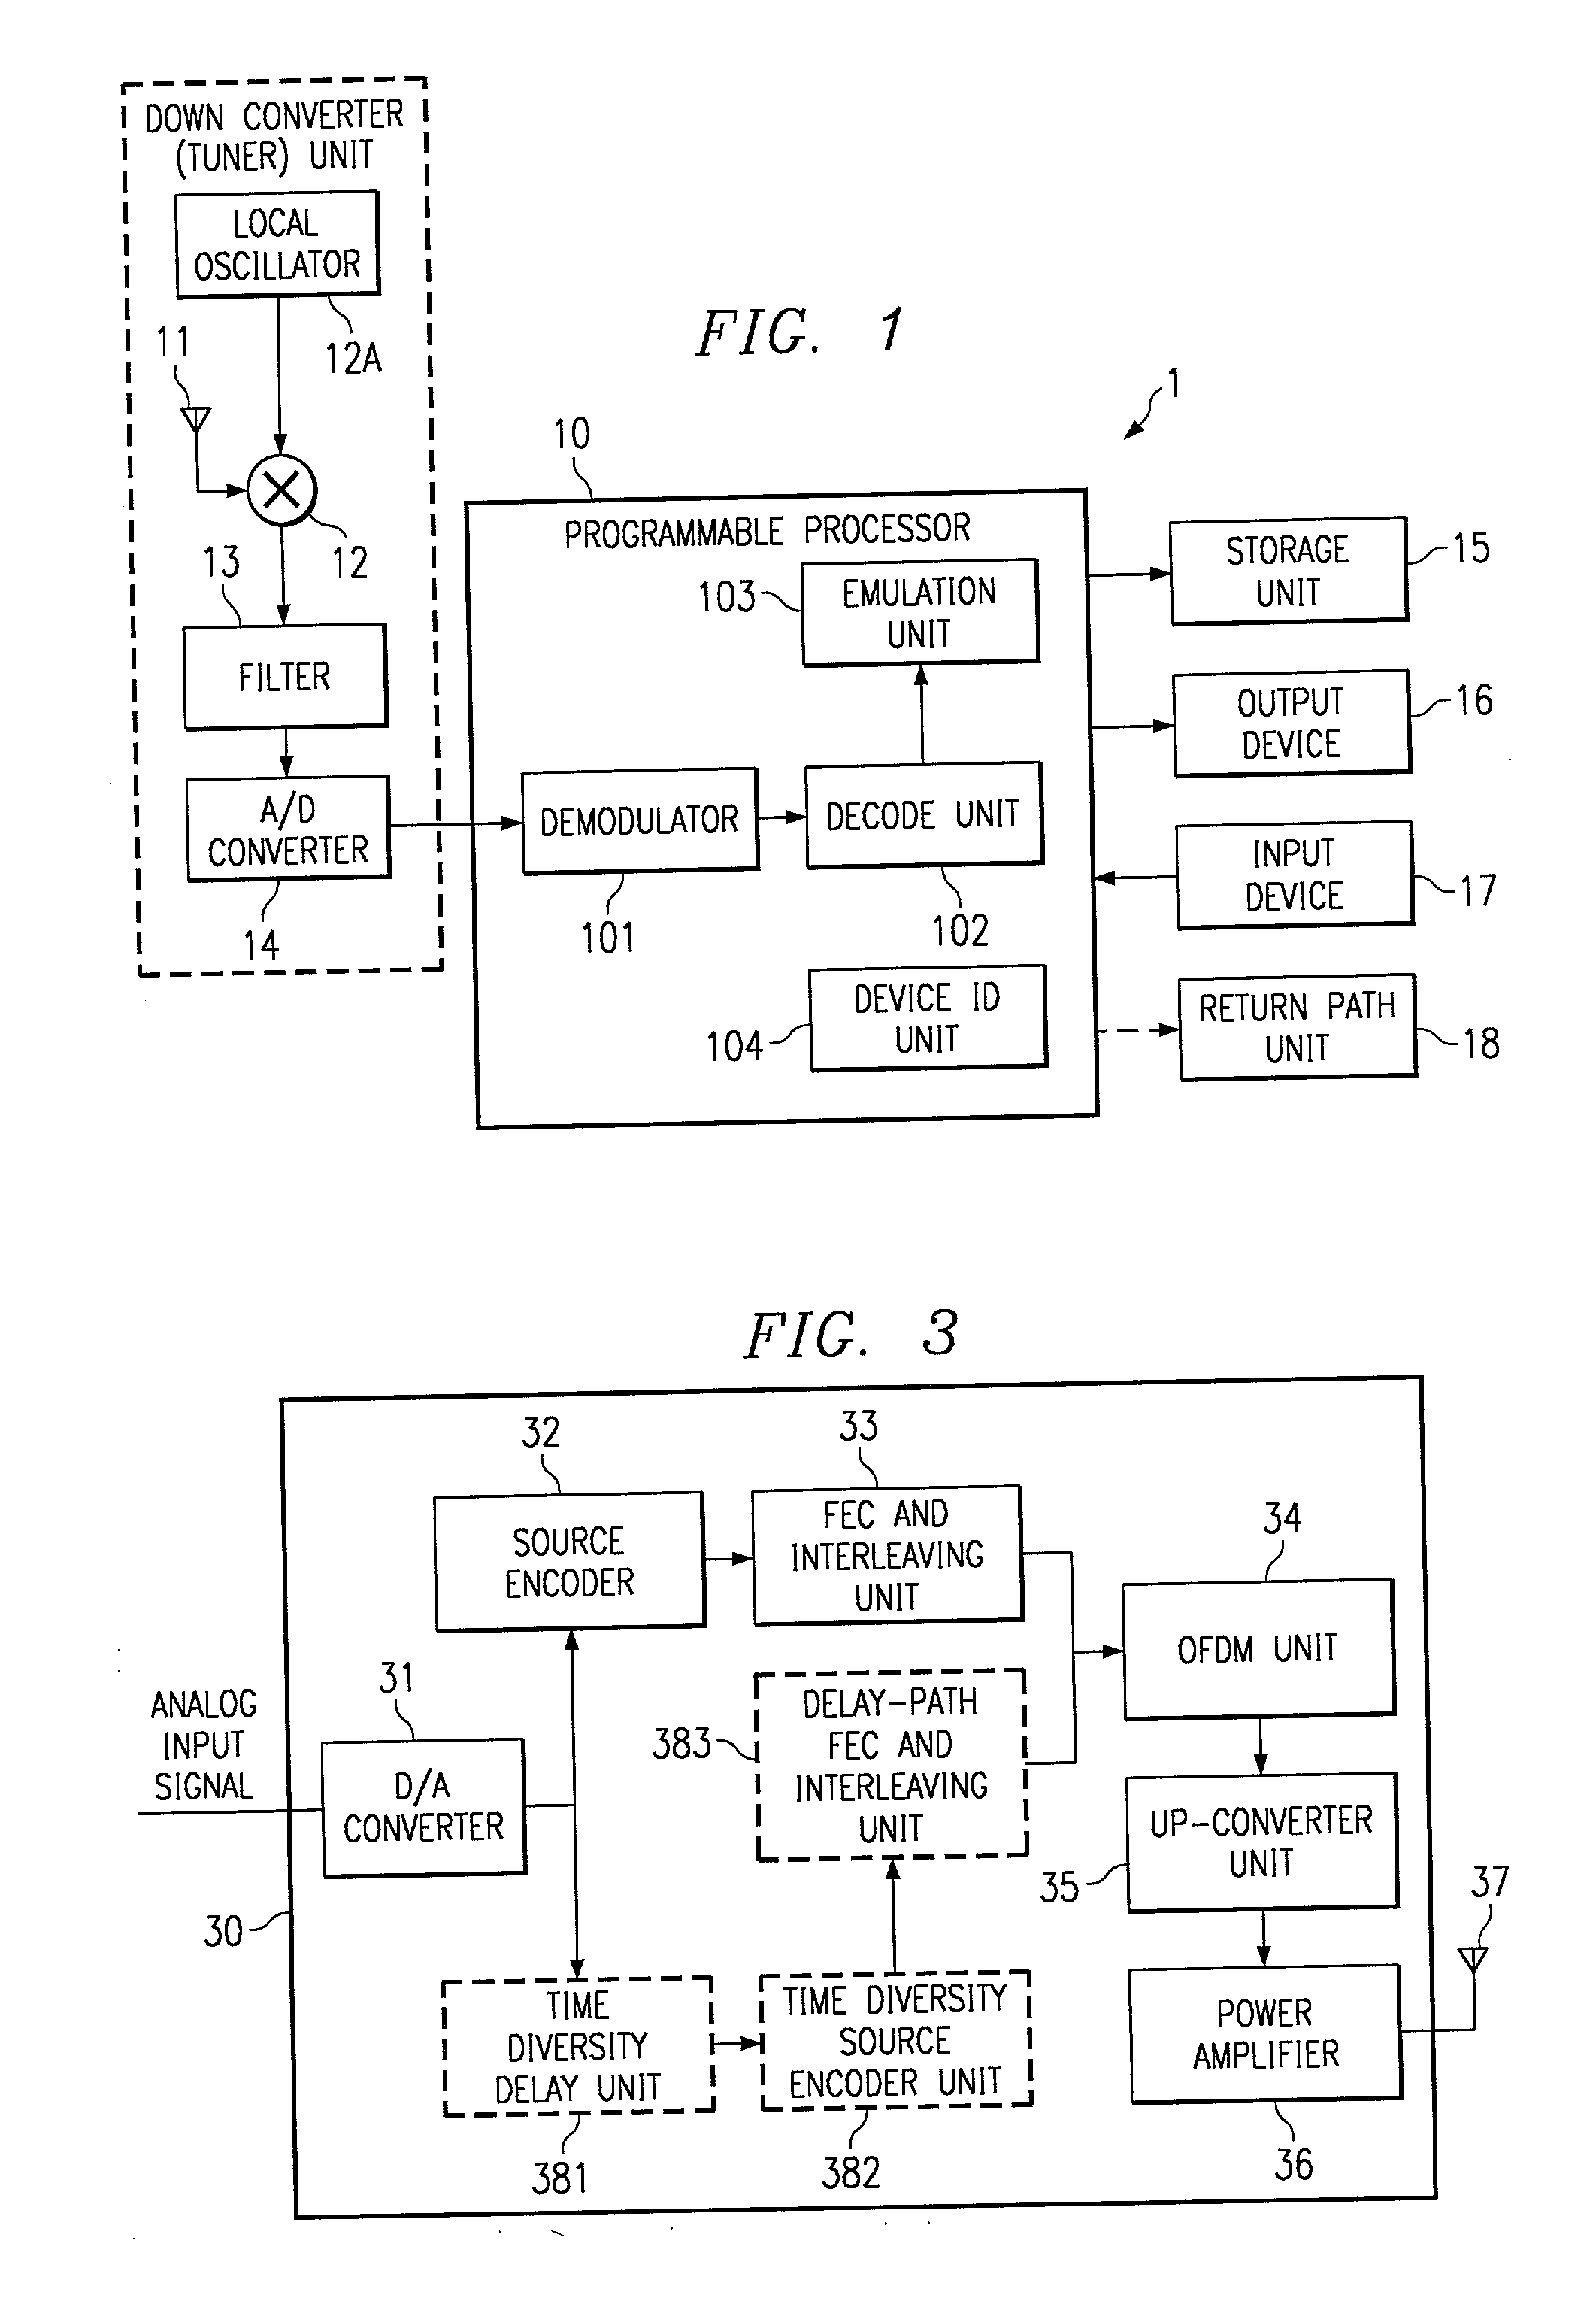 Apparatus and method for the transparent upgrading of technology and applications in digital radio systems using programmable transmitters and receivers